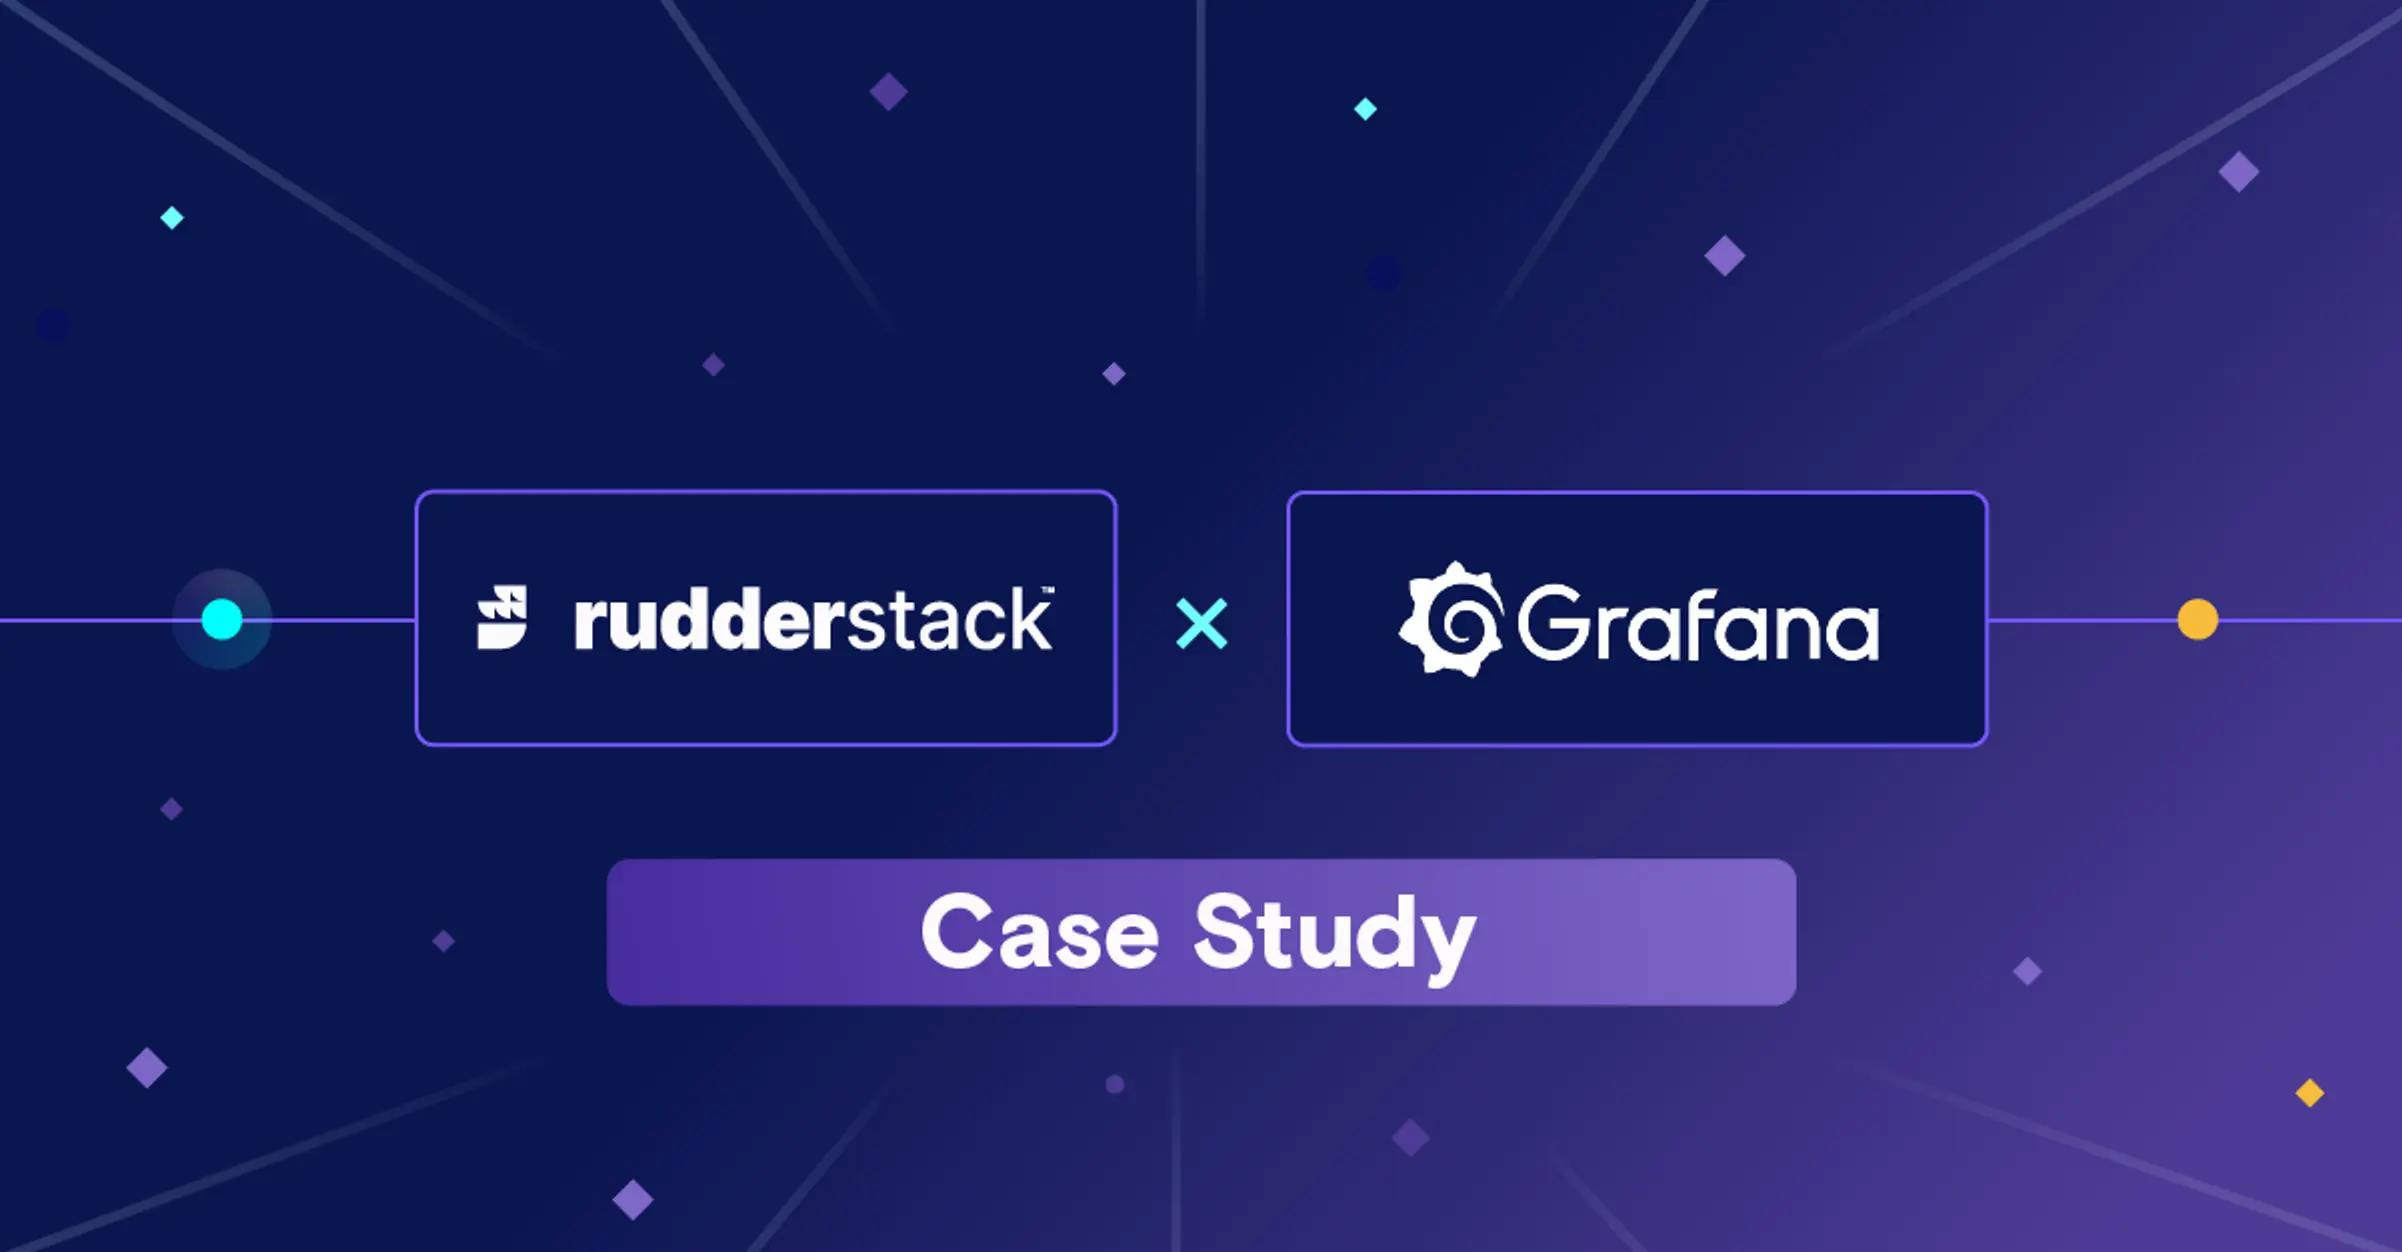 Grafana Increases Conversion Rates with RudderStack